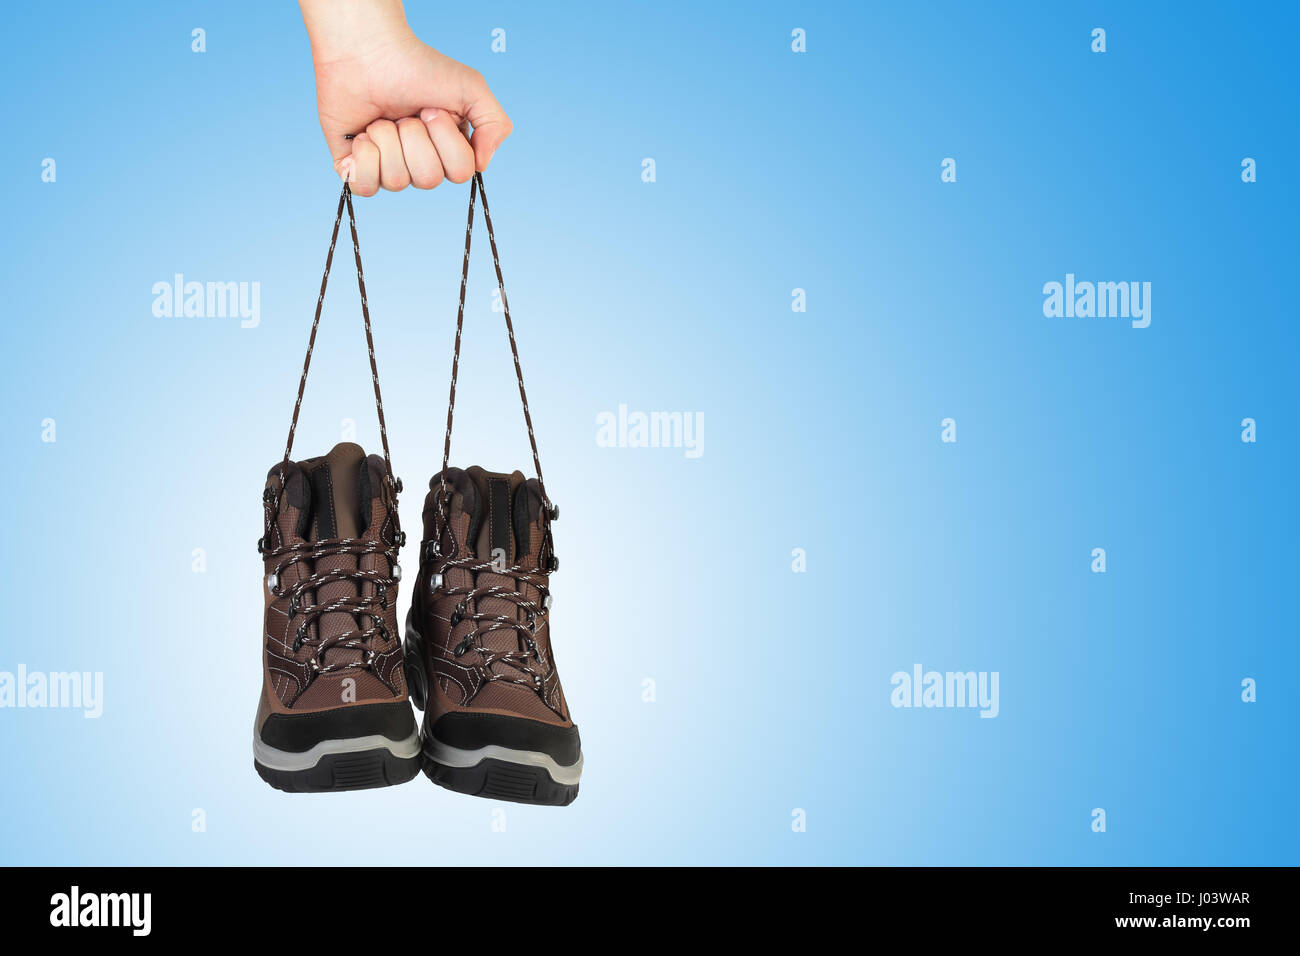 New shoes in hand on blue background. Hand hold shoes by shoelaces. Sale background with copyspace on blue background. Stock Photo